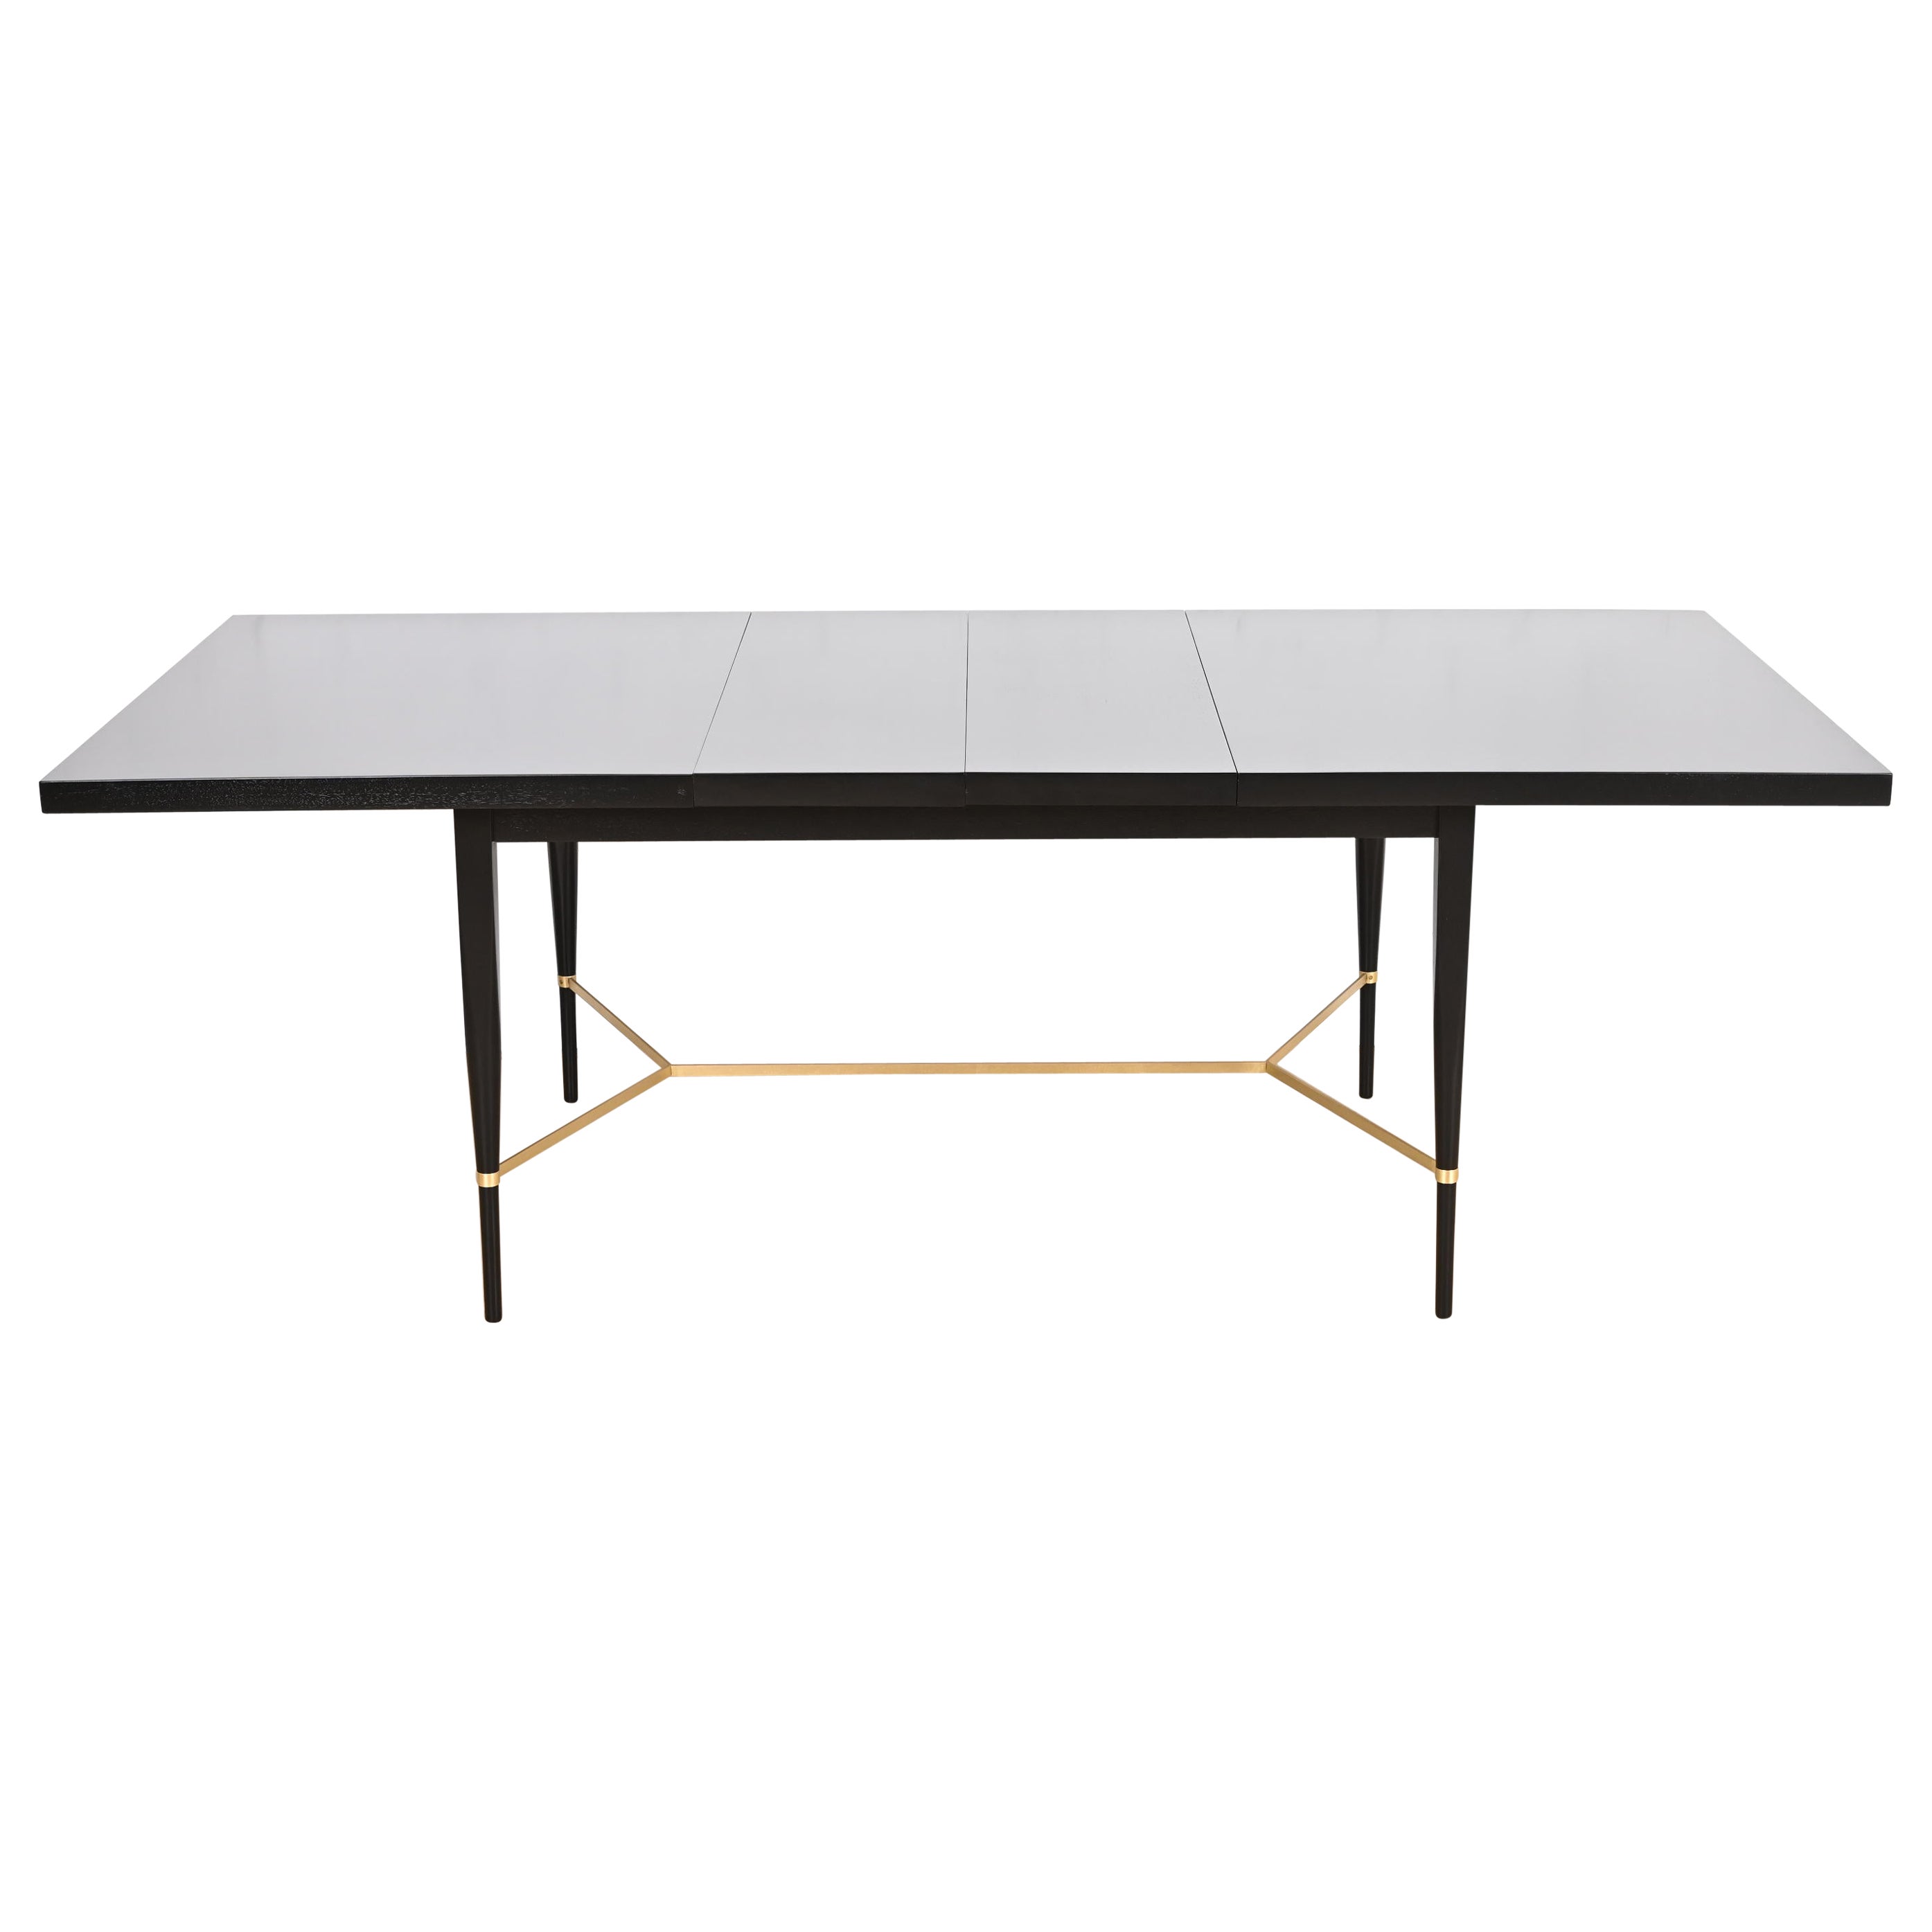 Paul McCobb for Directional Black Lacquer and Brass Dining Table, Refinished